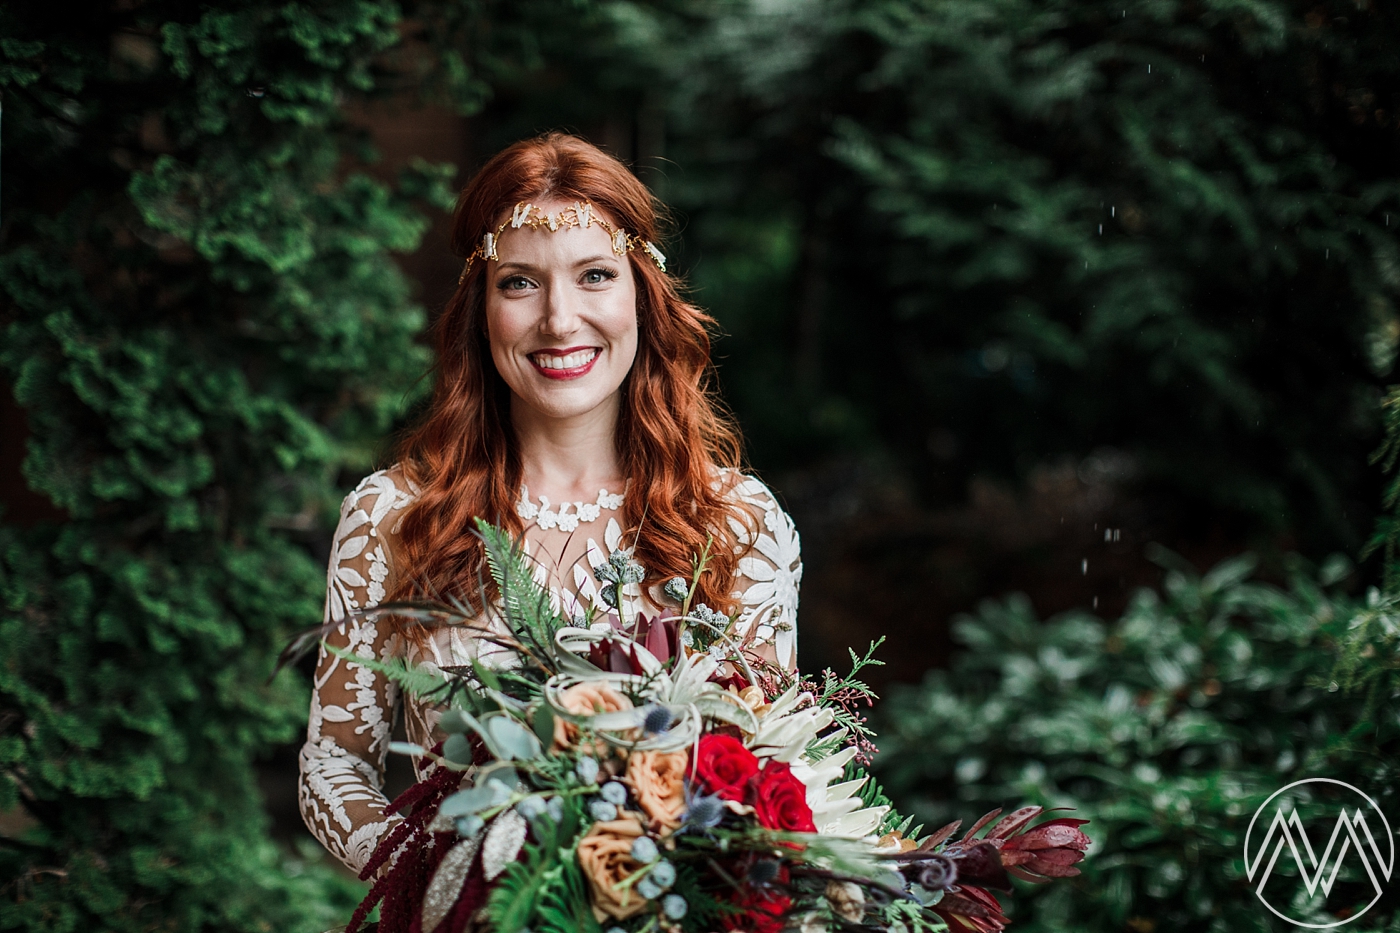 Bridal Hair and Makeup by Tacoma Hair + Makeup Artist, Elizabeth White Artistry. Photographed by Tacoma Wedding Photographer, Megan Montalvo Photography. 